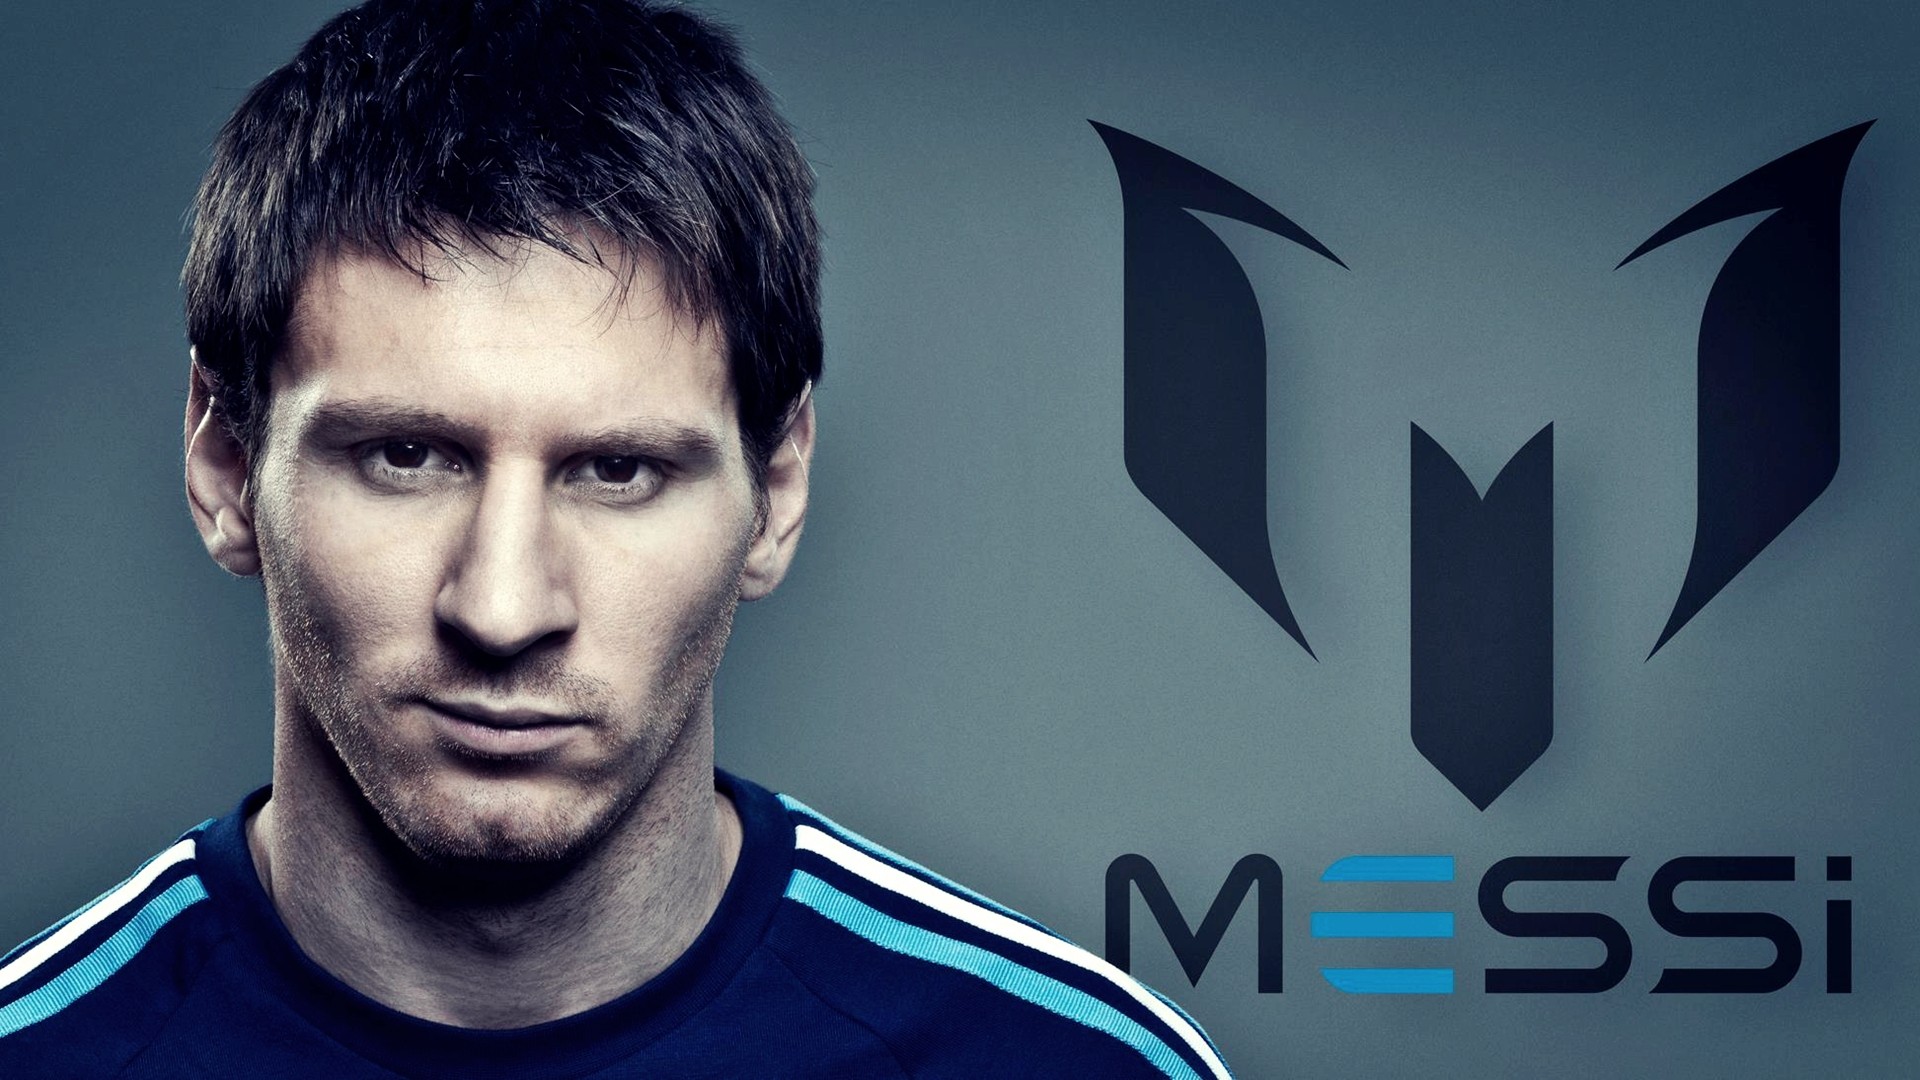 lionel, Messi, Football, Player, Lionel, Andres, Messi, Messi Wallpaper